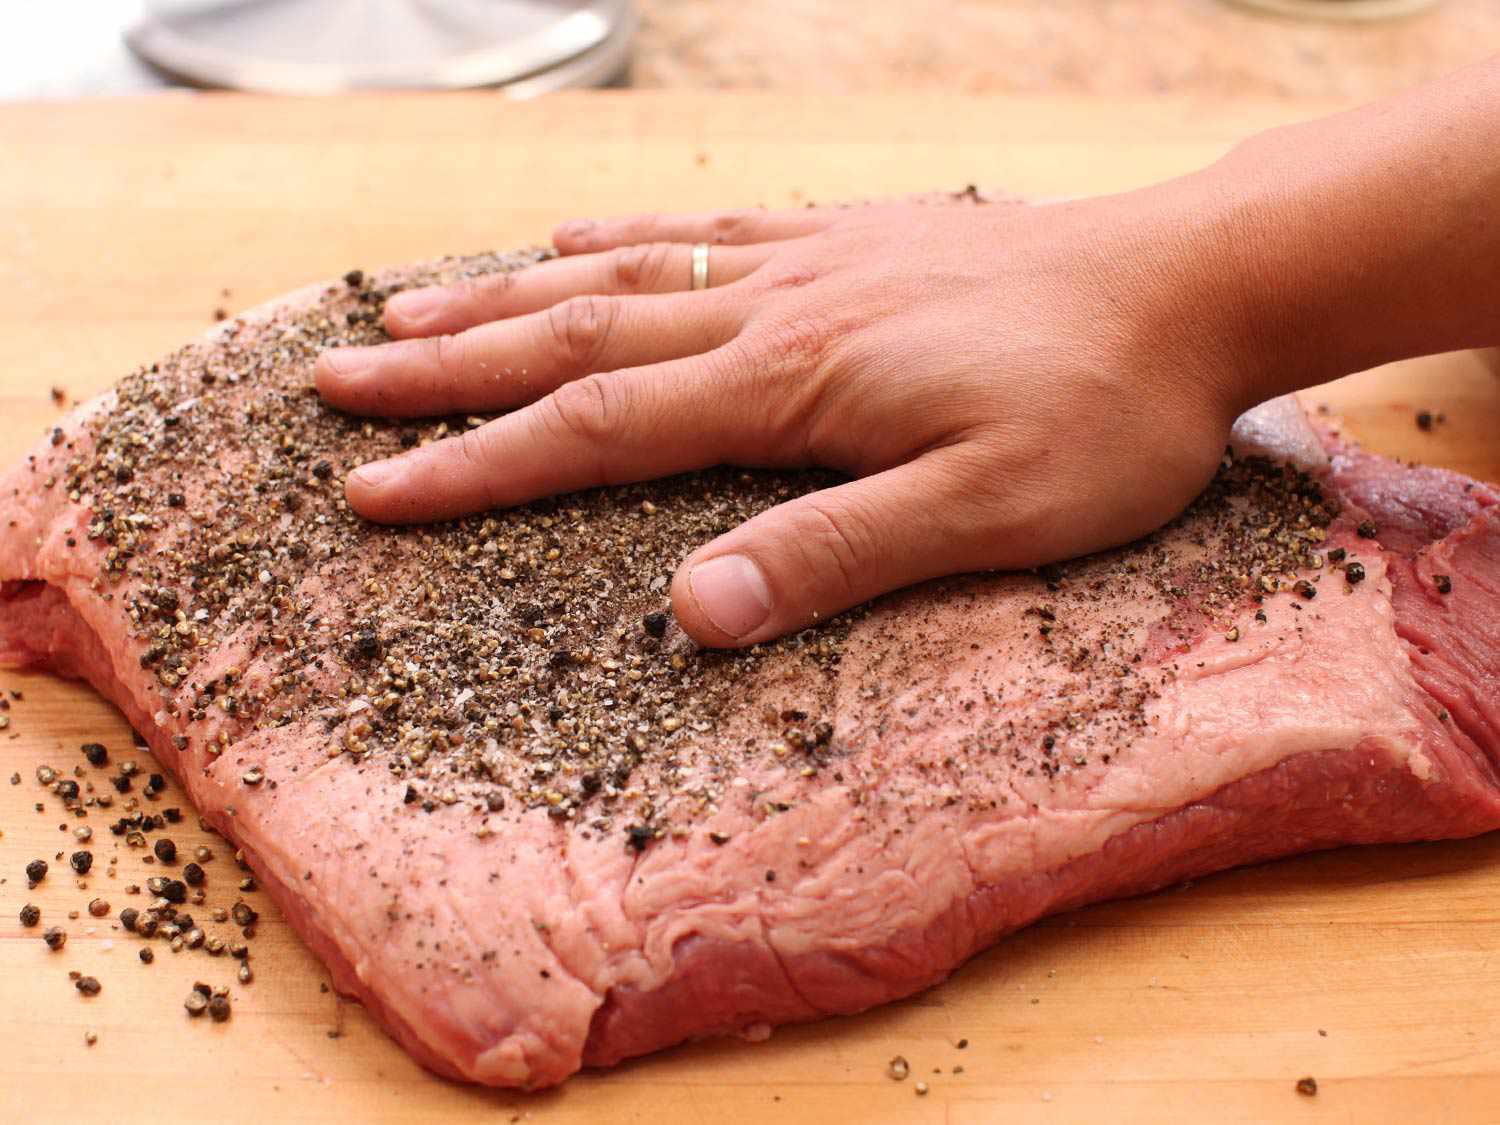 A hand rubbing coarsely ground peppercorns over a slab of brisket